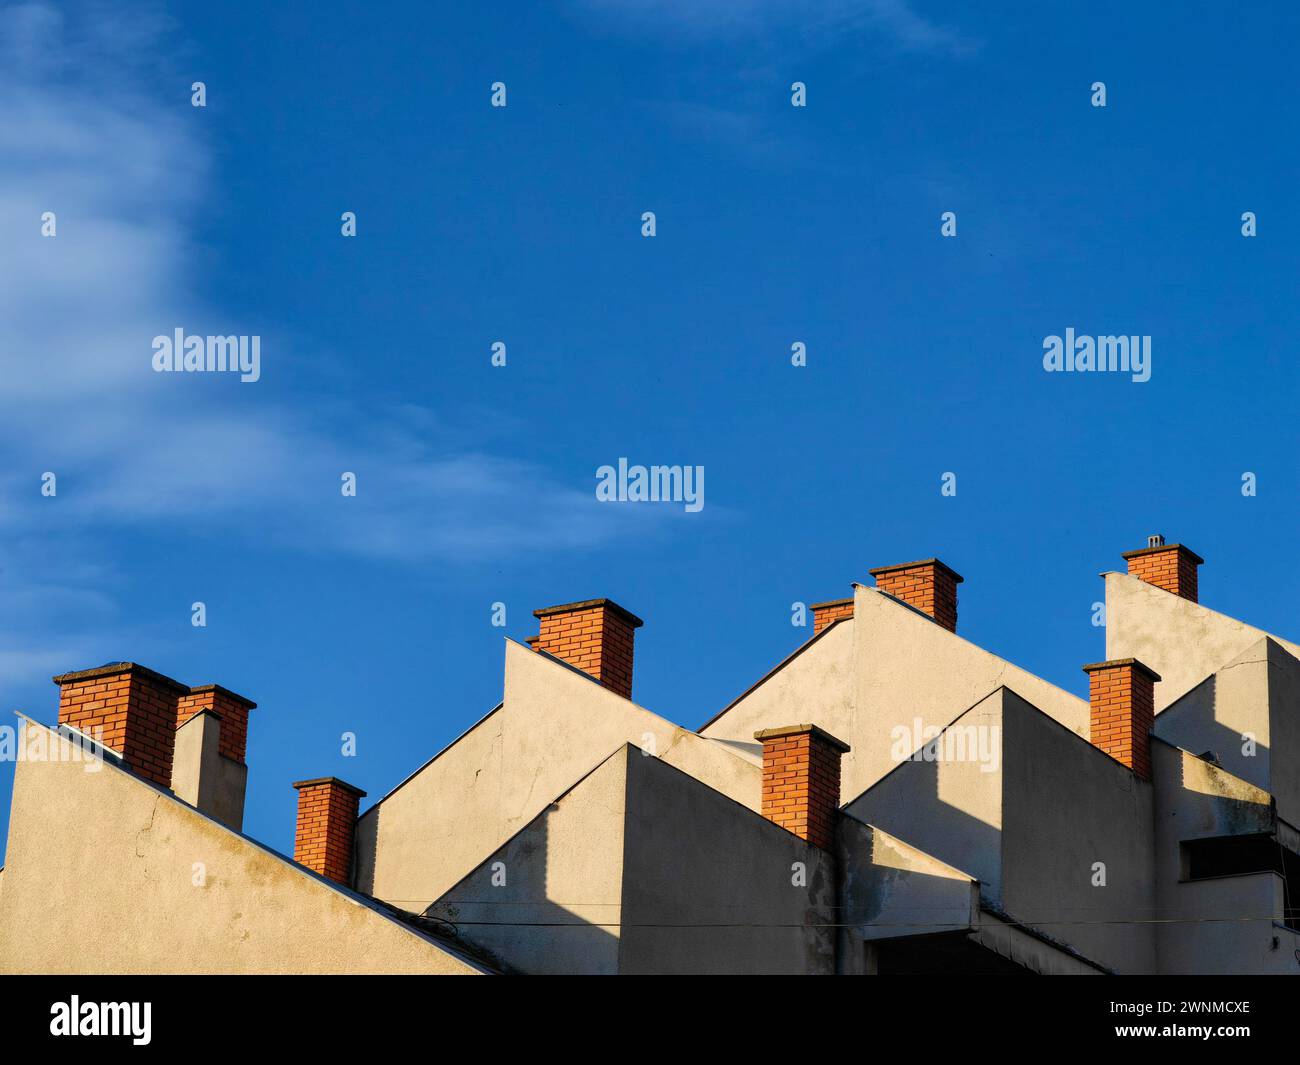 Rising above. Building rooftop brick chimneys against the vast blue skyline. Stock Photo